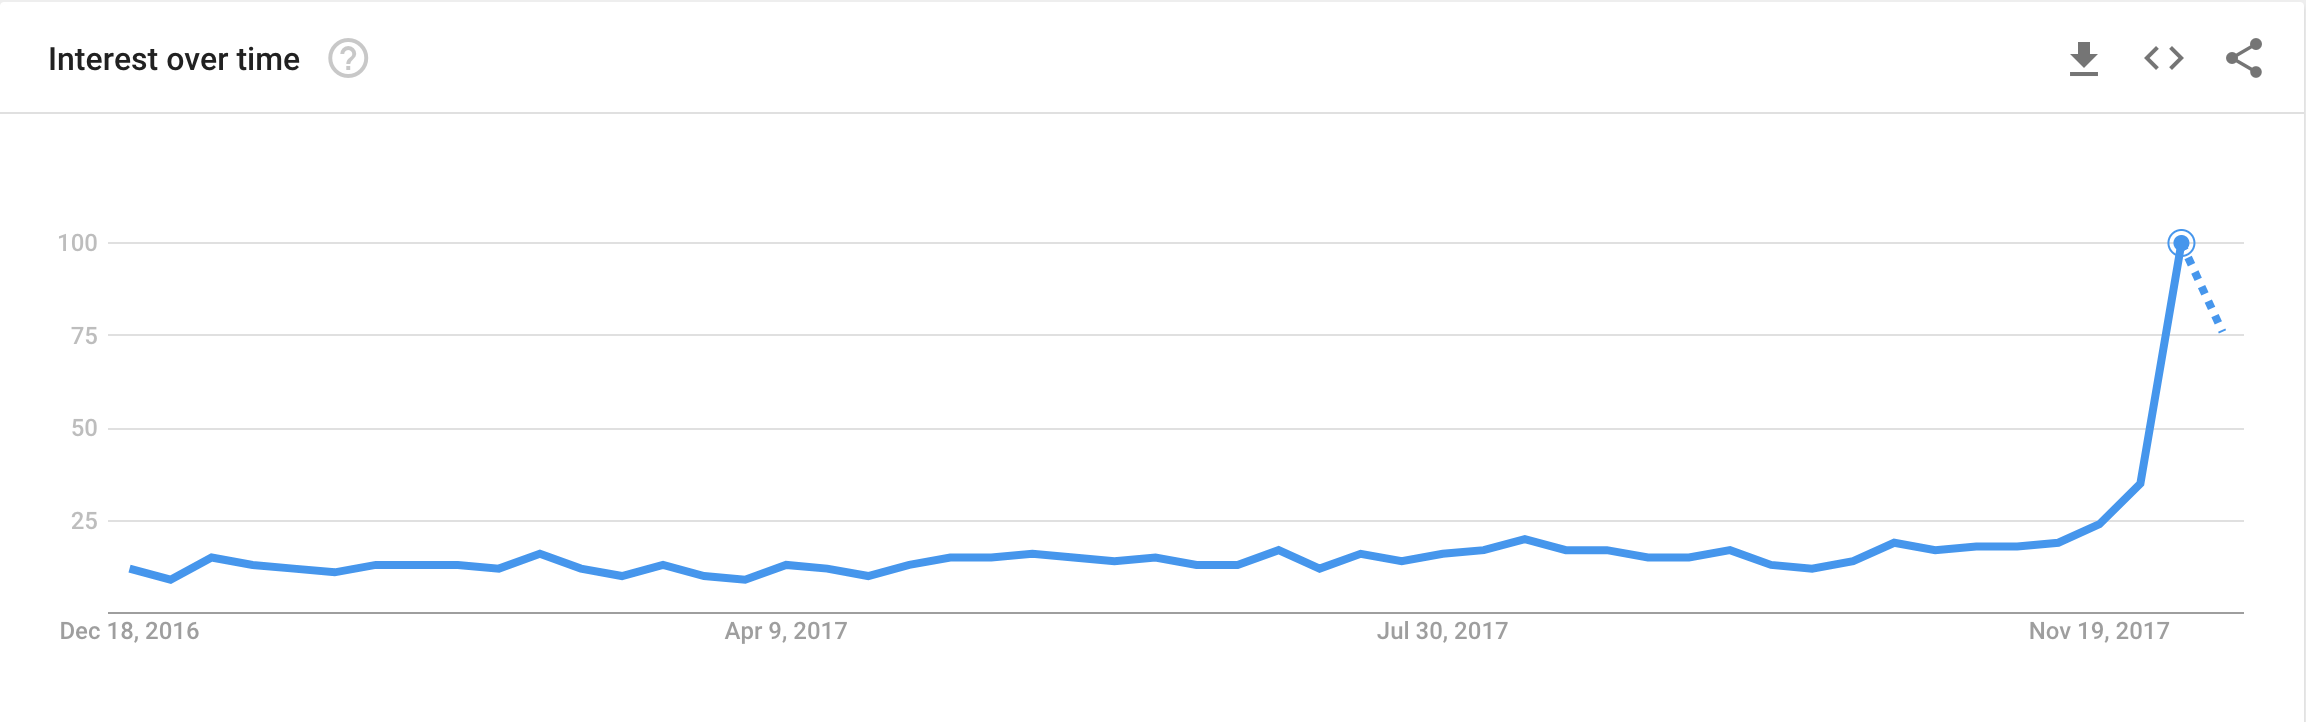 Bitcoin Hack Reaches 100 In Google Trends Home Of P2p Finance - 